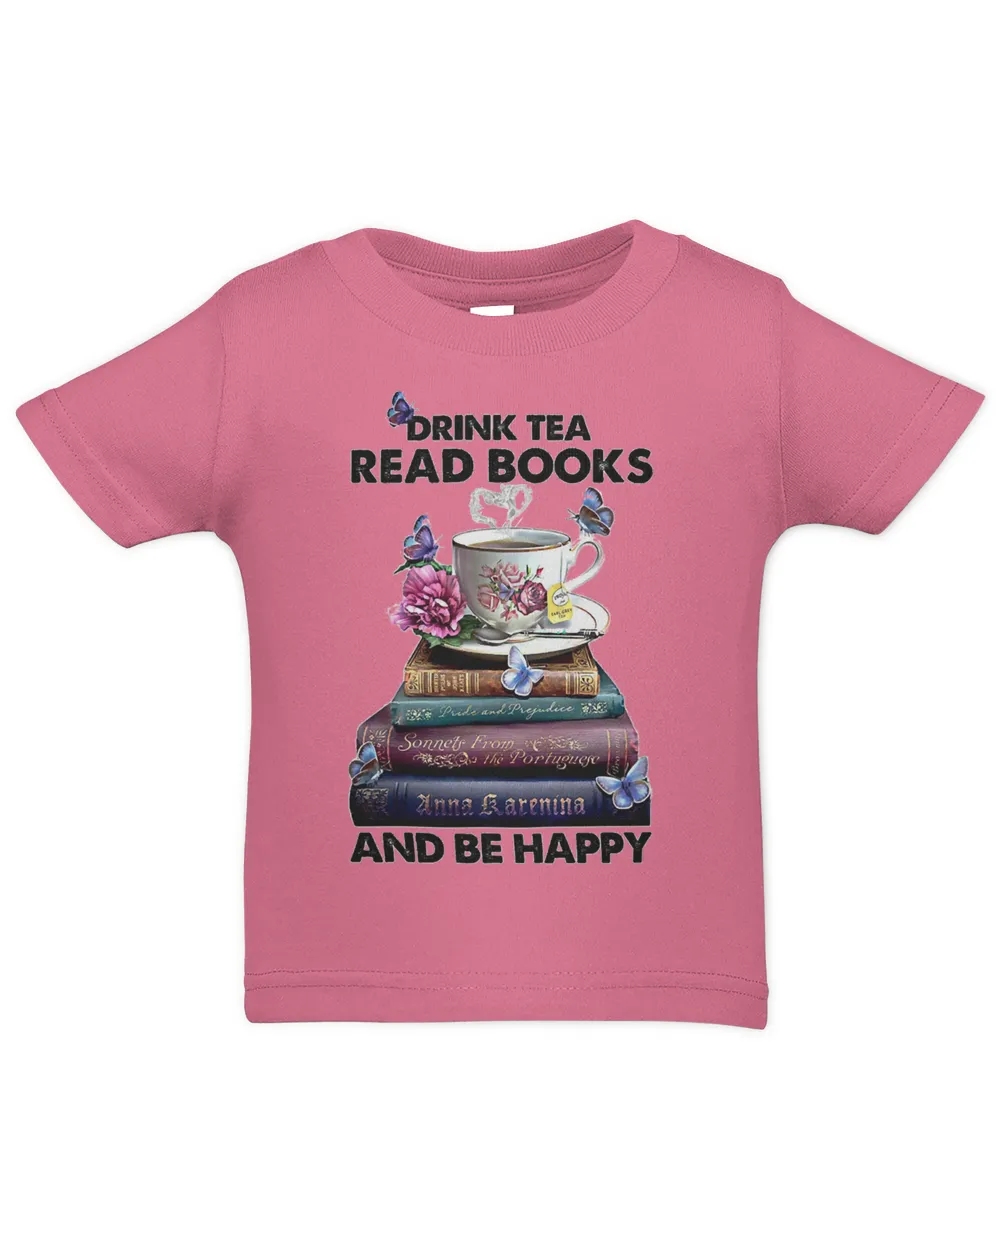 Book Reader Drink Tea Read Books And Be Happy 291 Reading Library